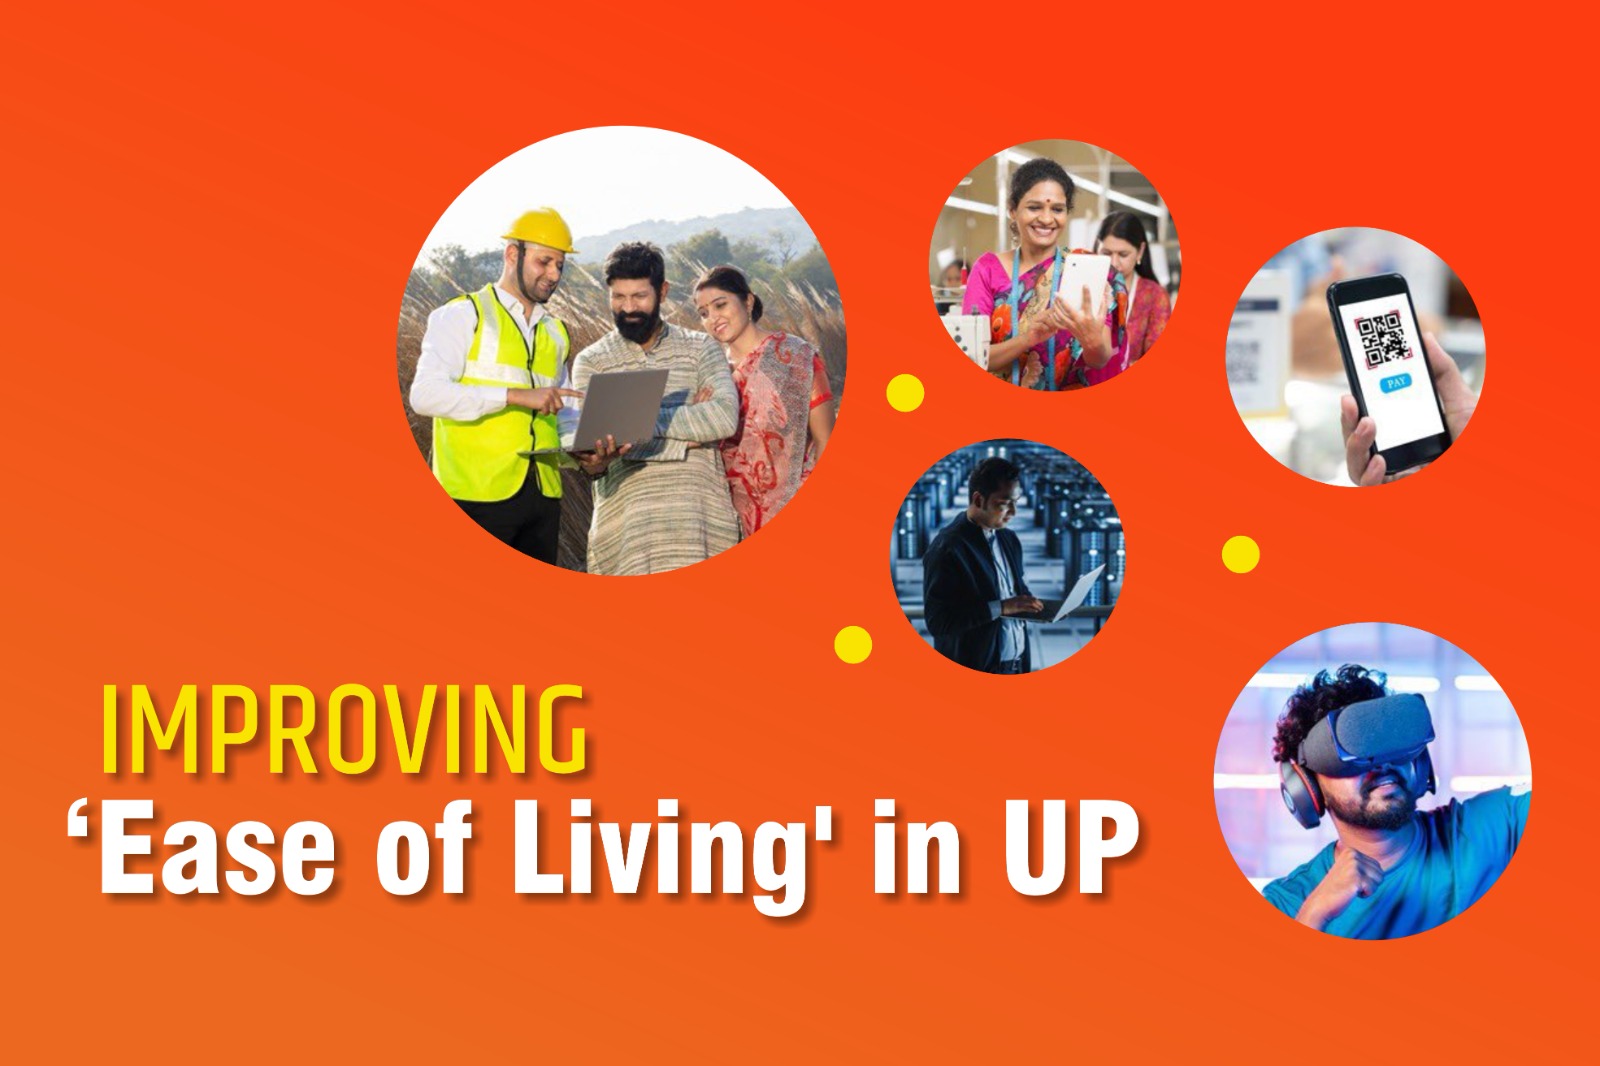 Improving Ease of Living in UP